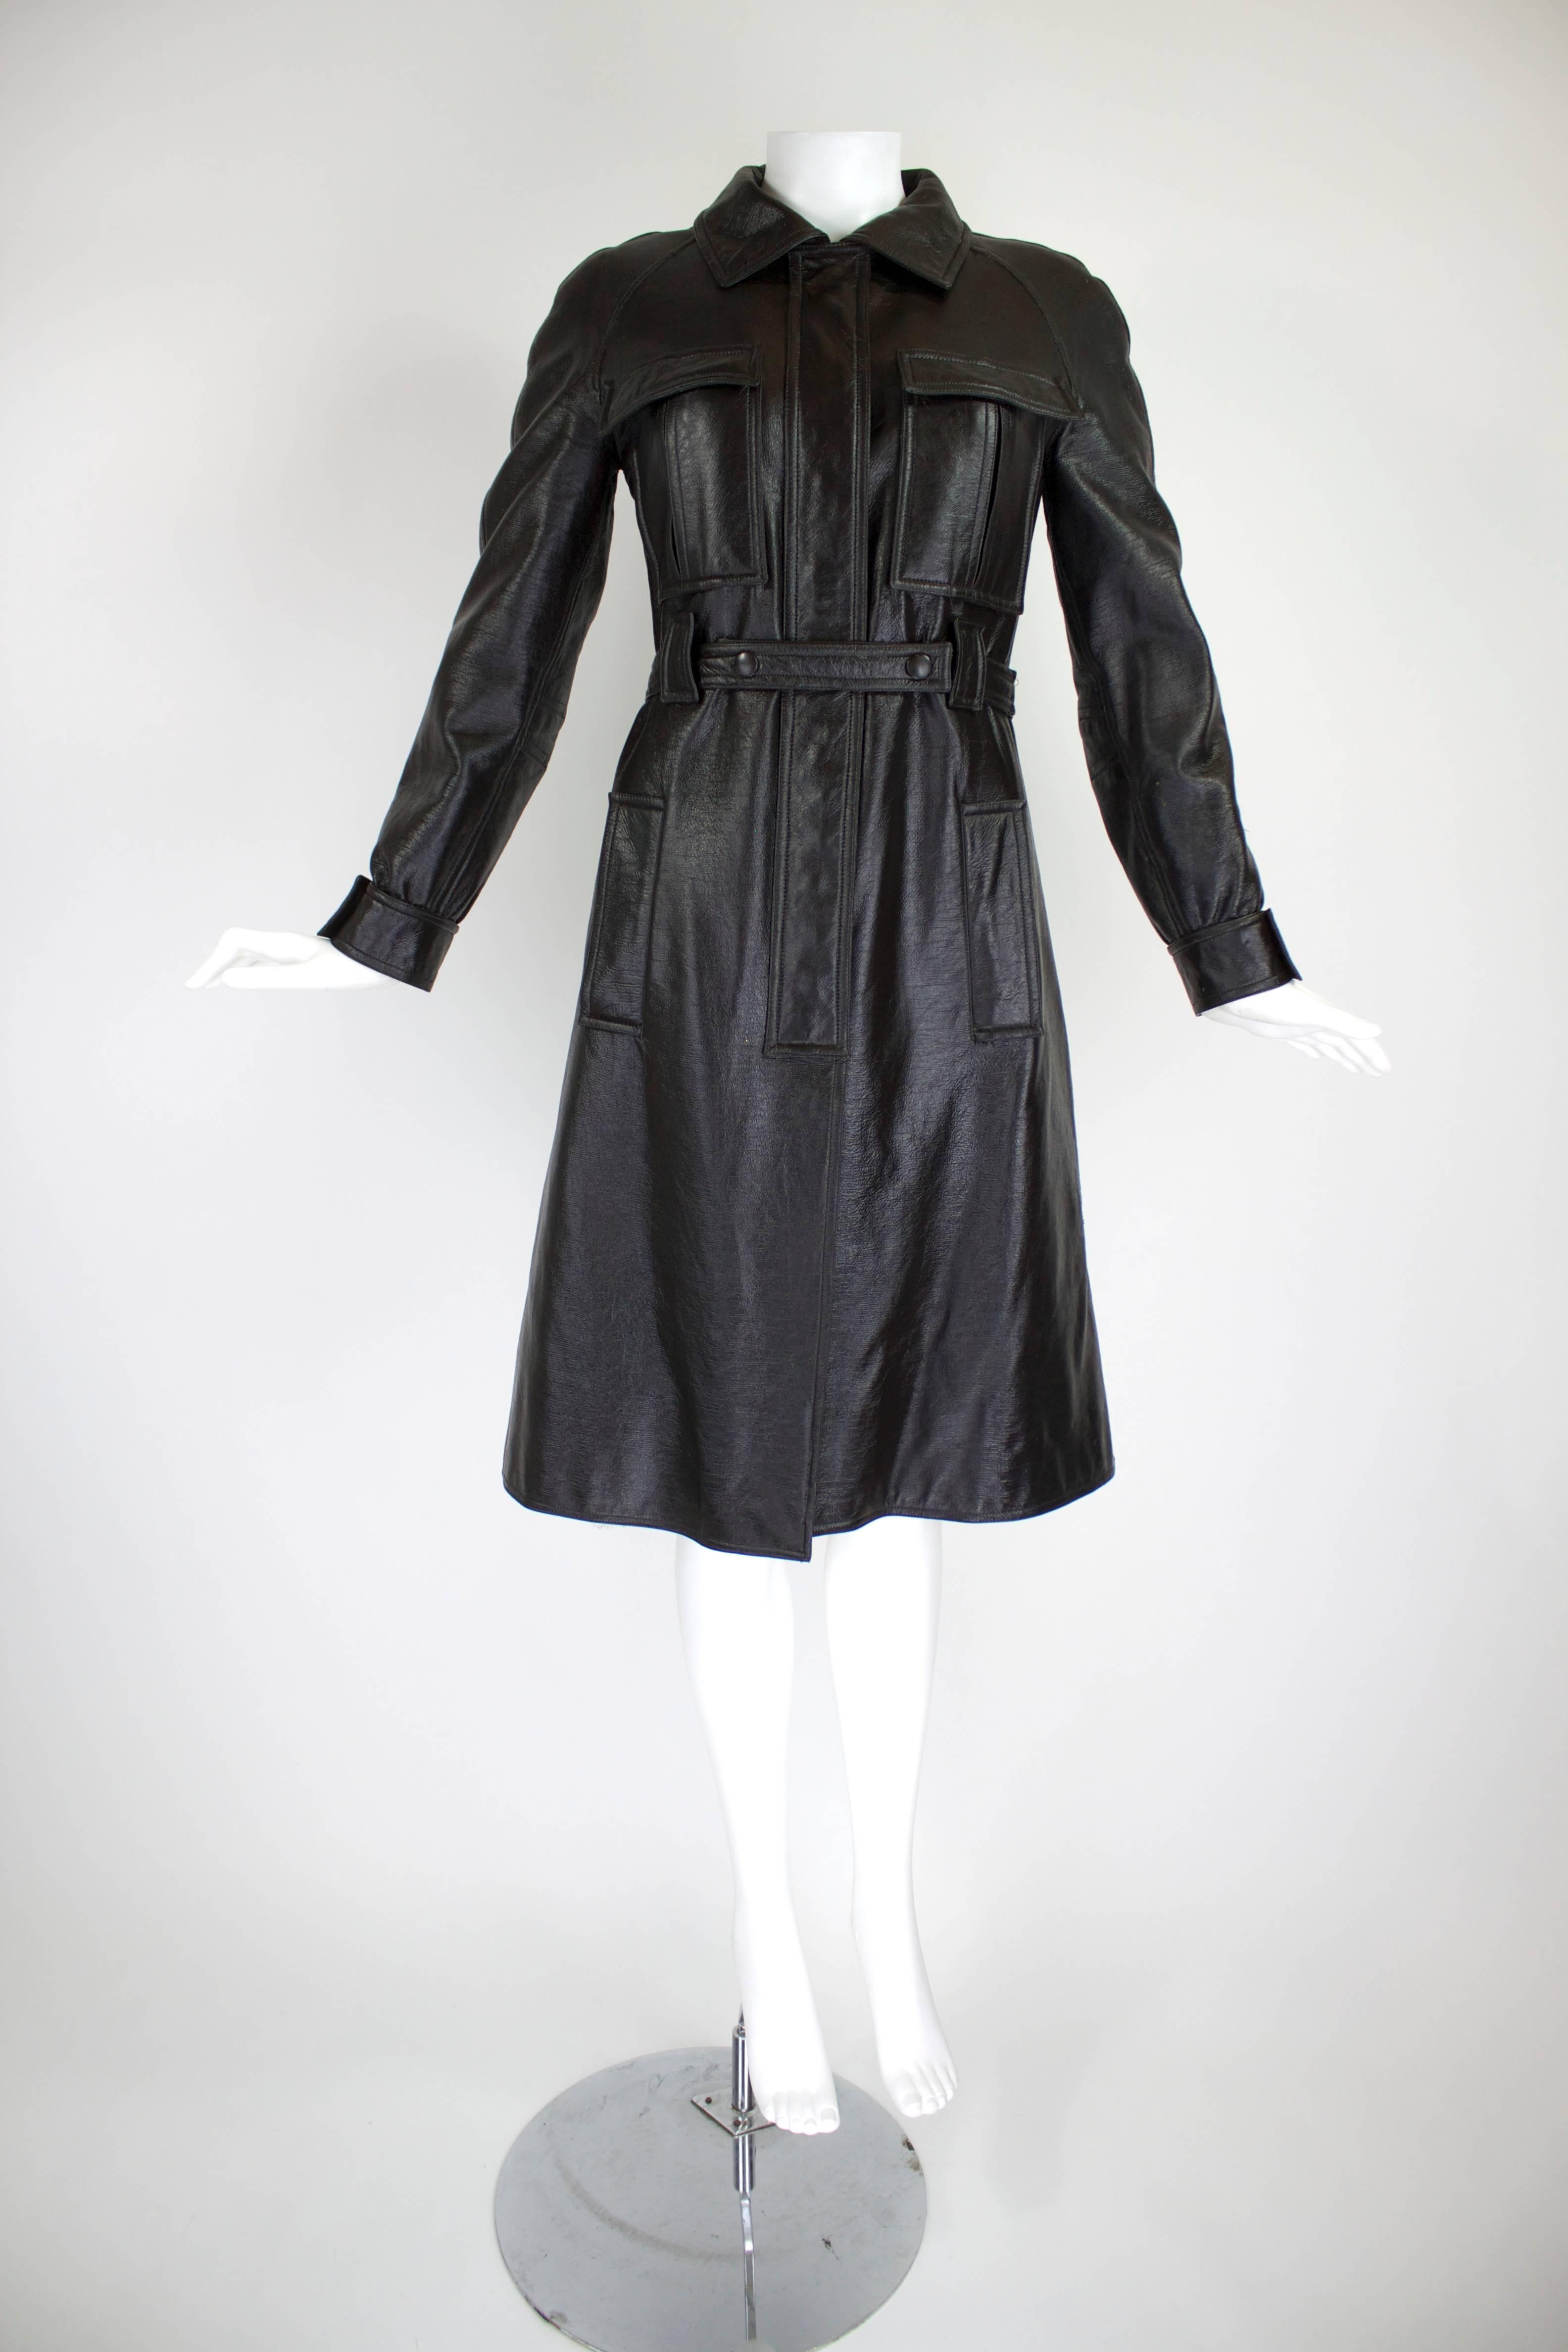 An iconic 1960s Courrèges vinyl trench coat with matching belt. The button-front silhouette features four functional snap pockets. Center seam in back at hem features three snap closures for fit flexibility. Fully lined in fleece.

Bust: 34